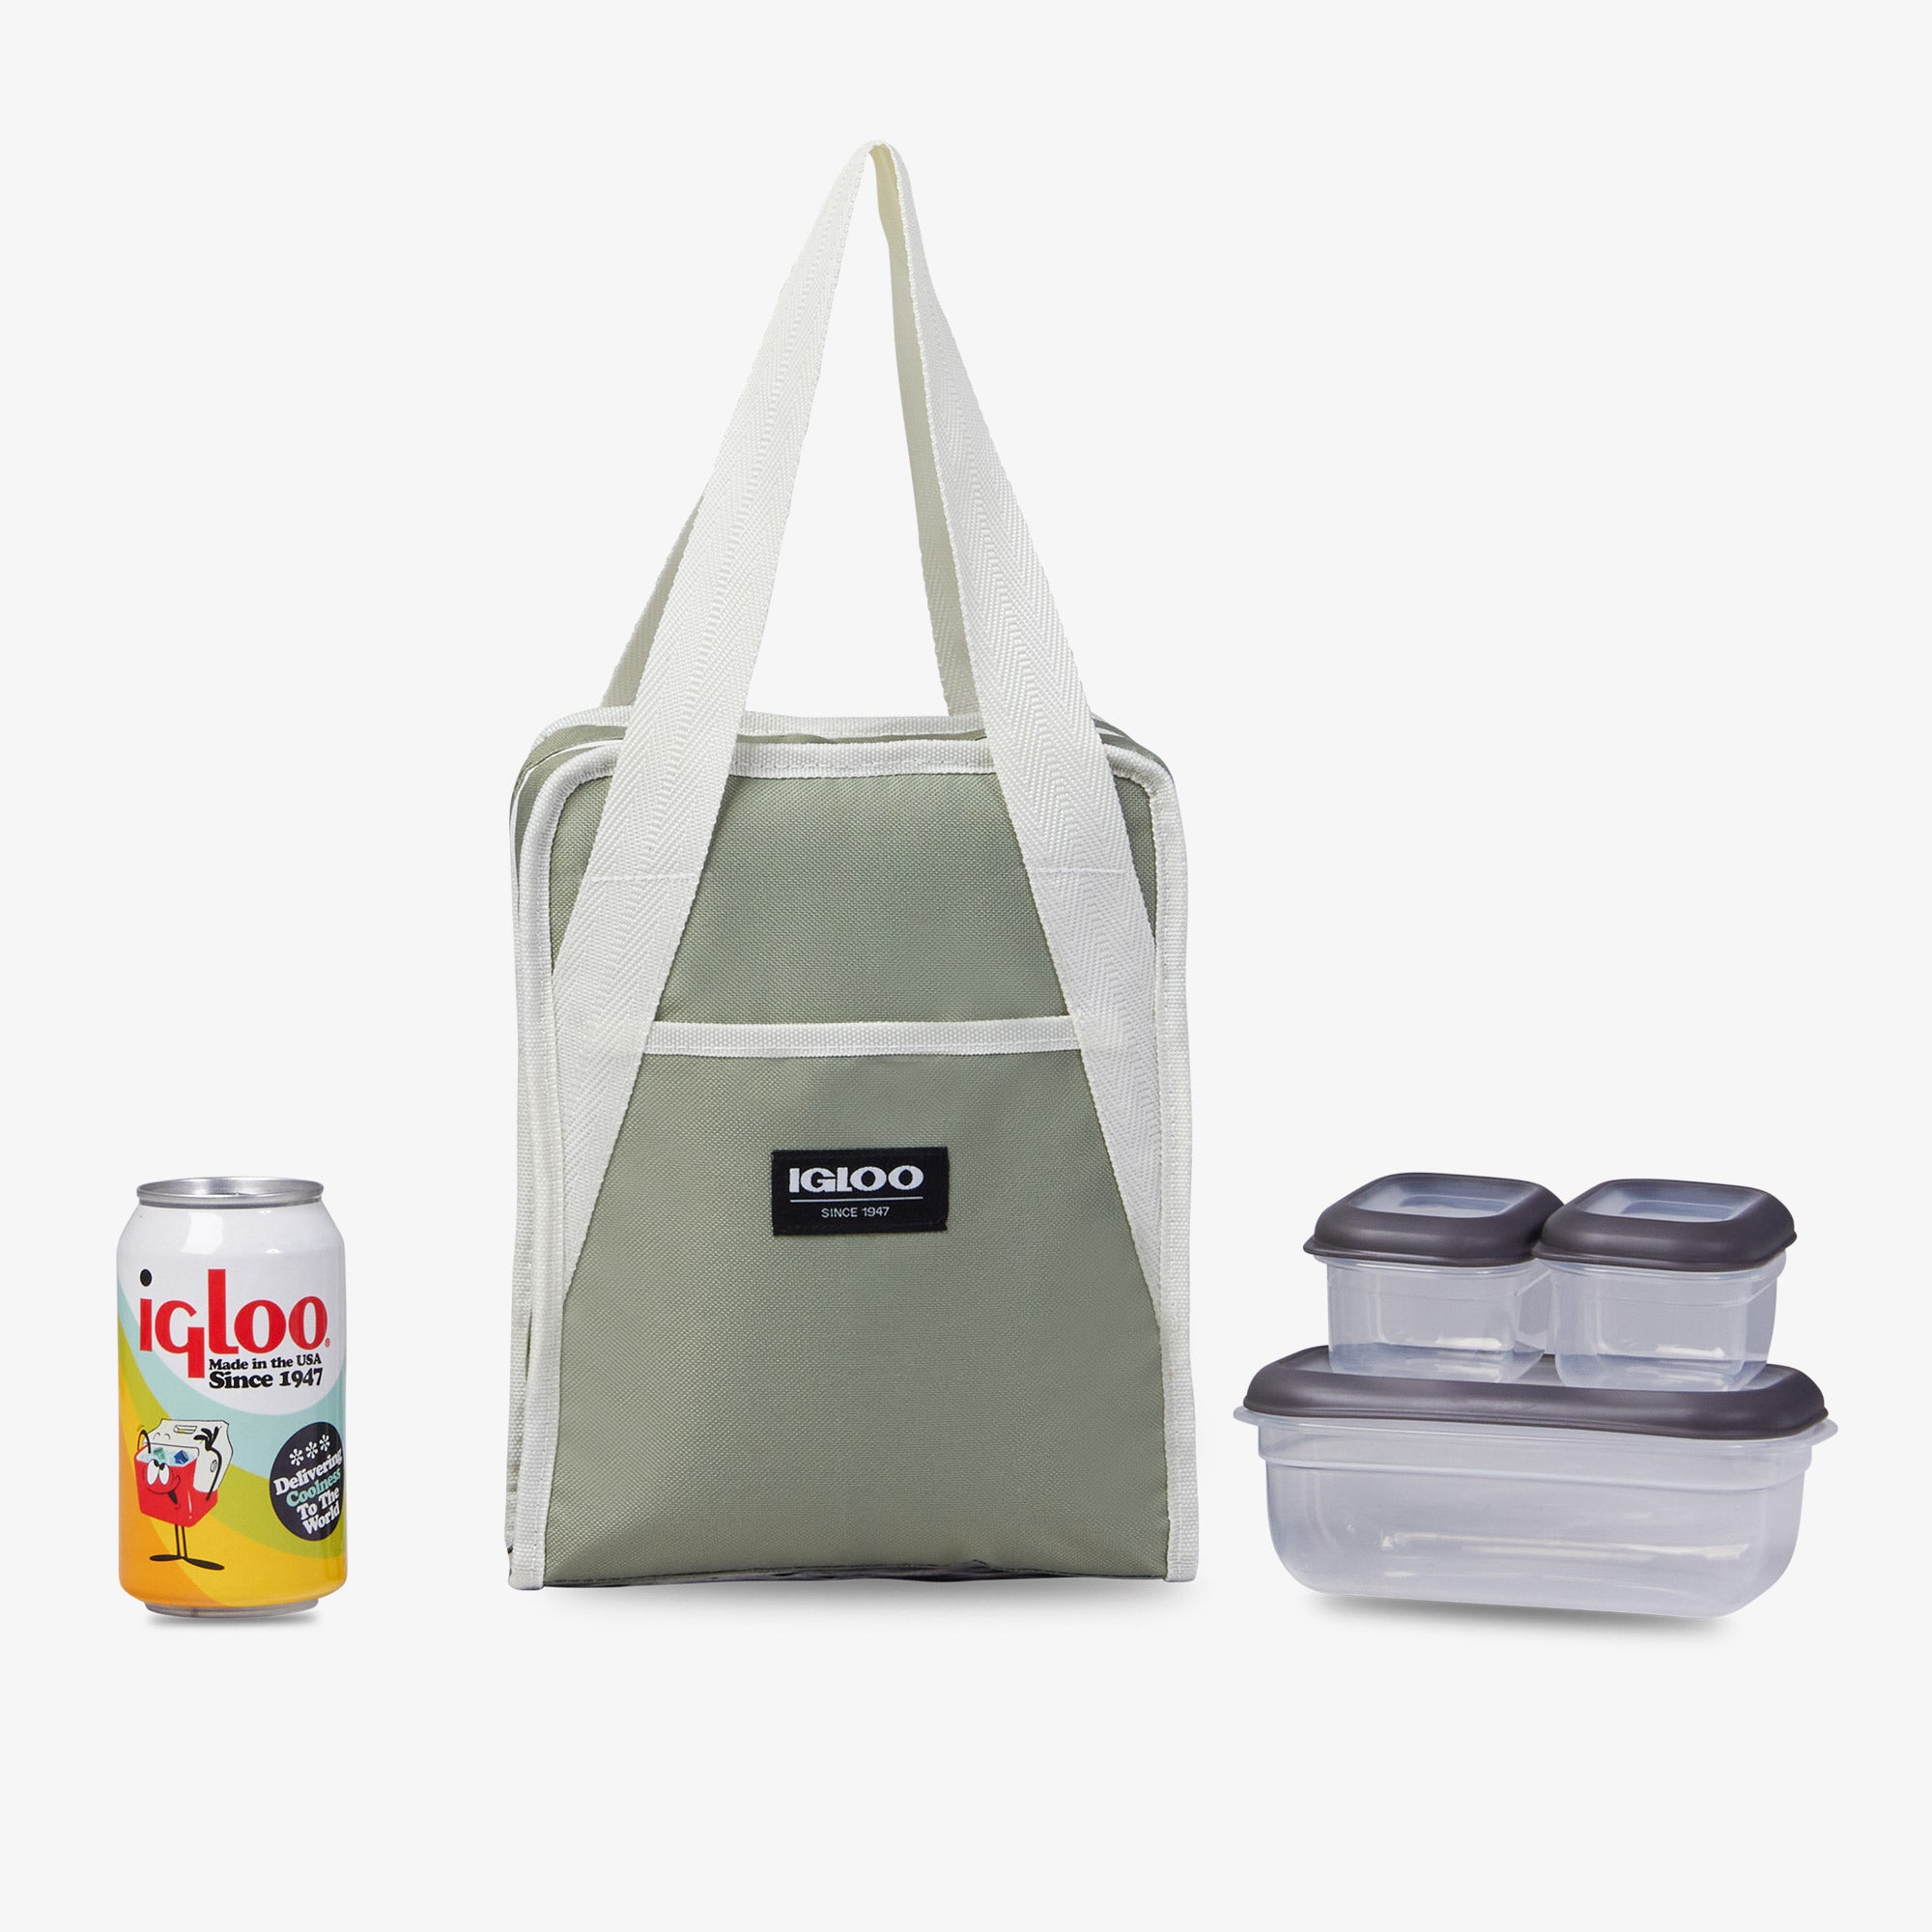 Cooler bag 40 litres - 2 compartments - soft, easy to organise cooler bag